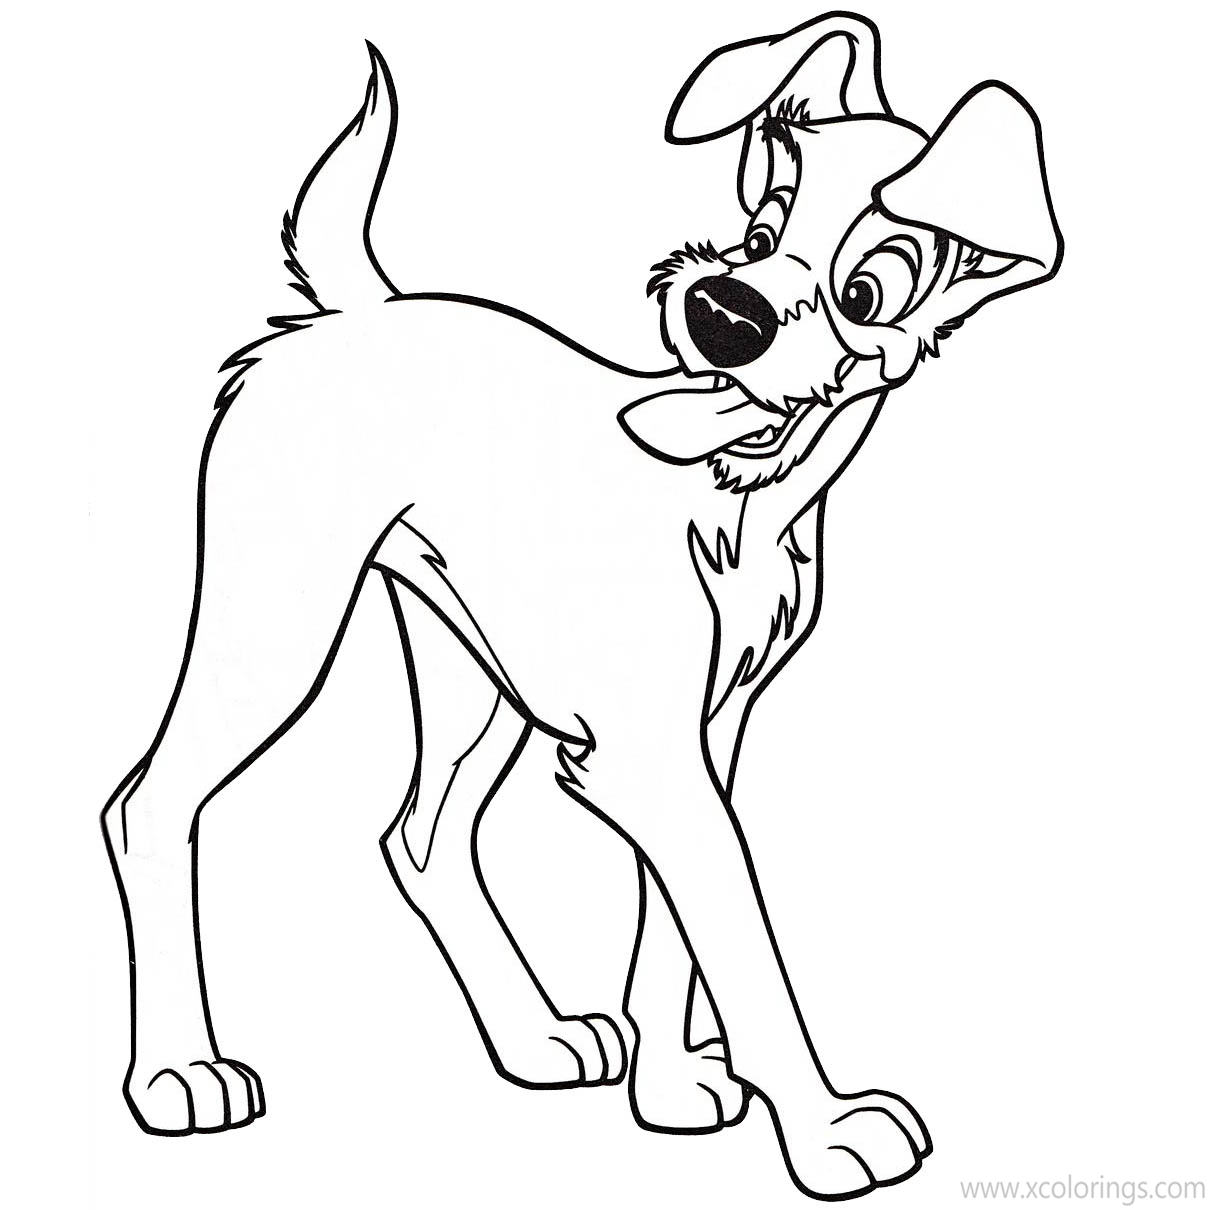 Free Lady and the Tramp Coloring Pages Tramp is Walking printable